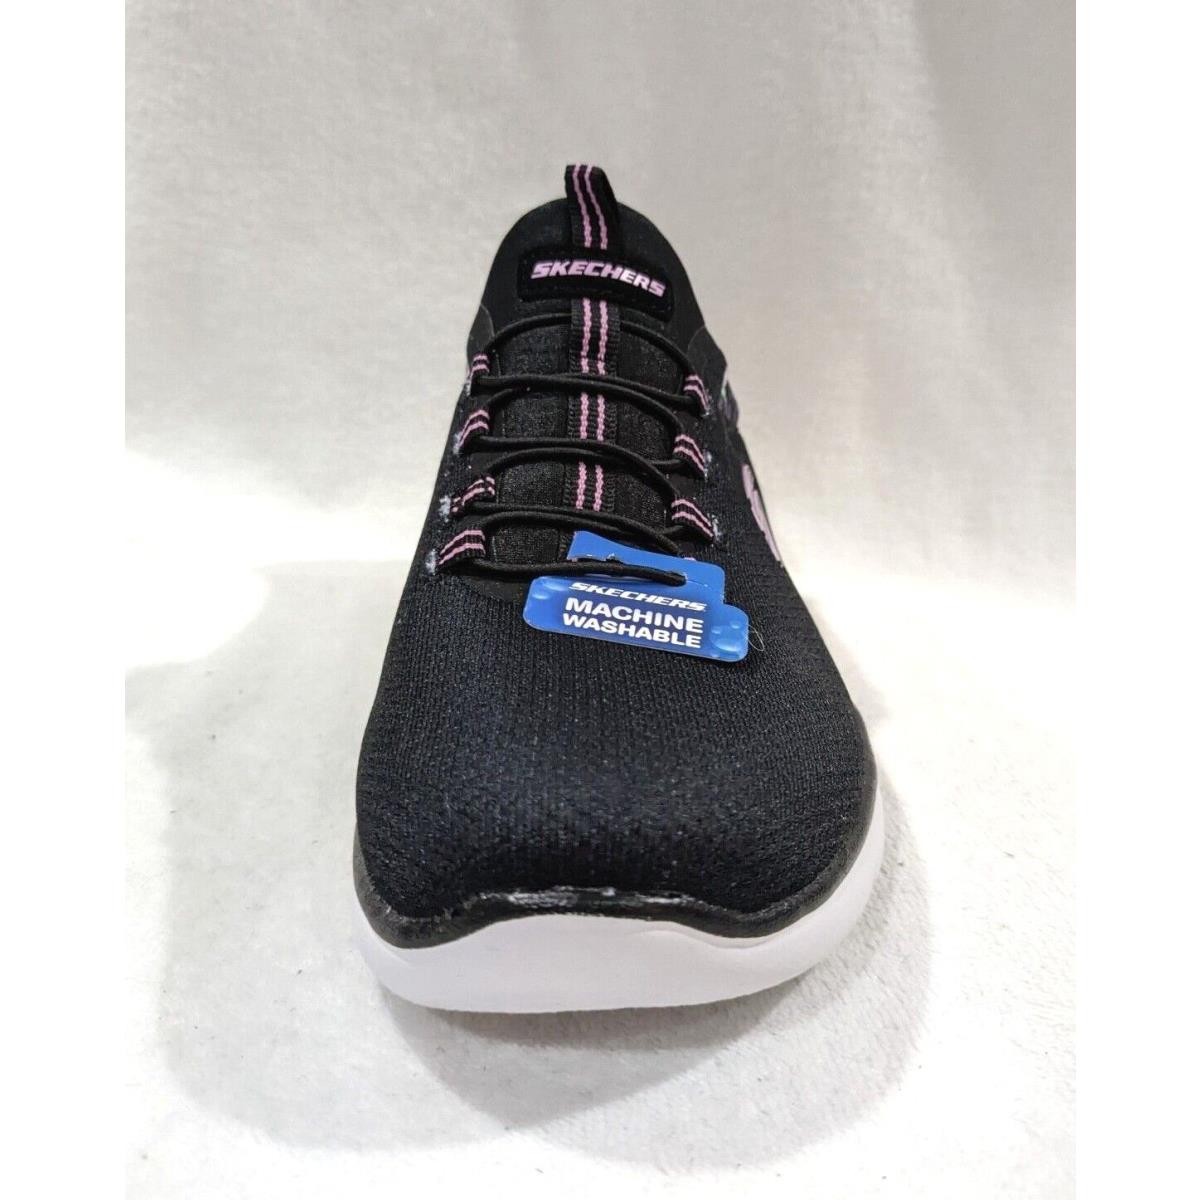 Skechers shoes Summits Perfect Blossom - Black 3